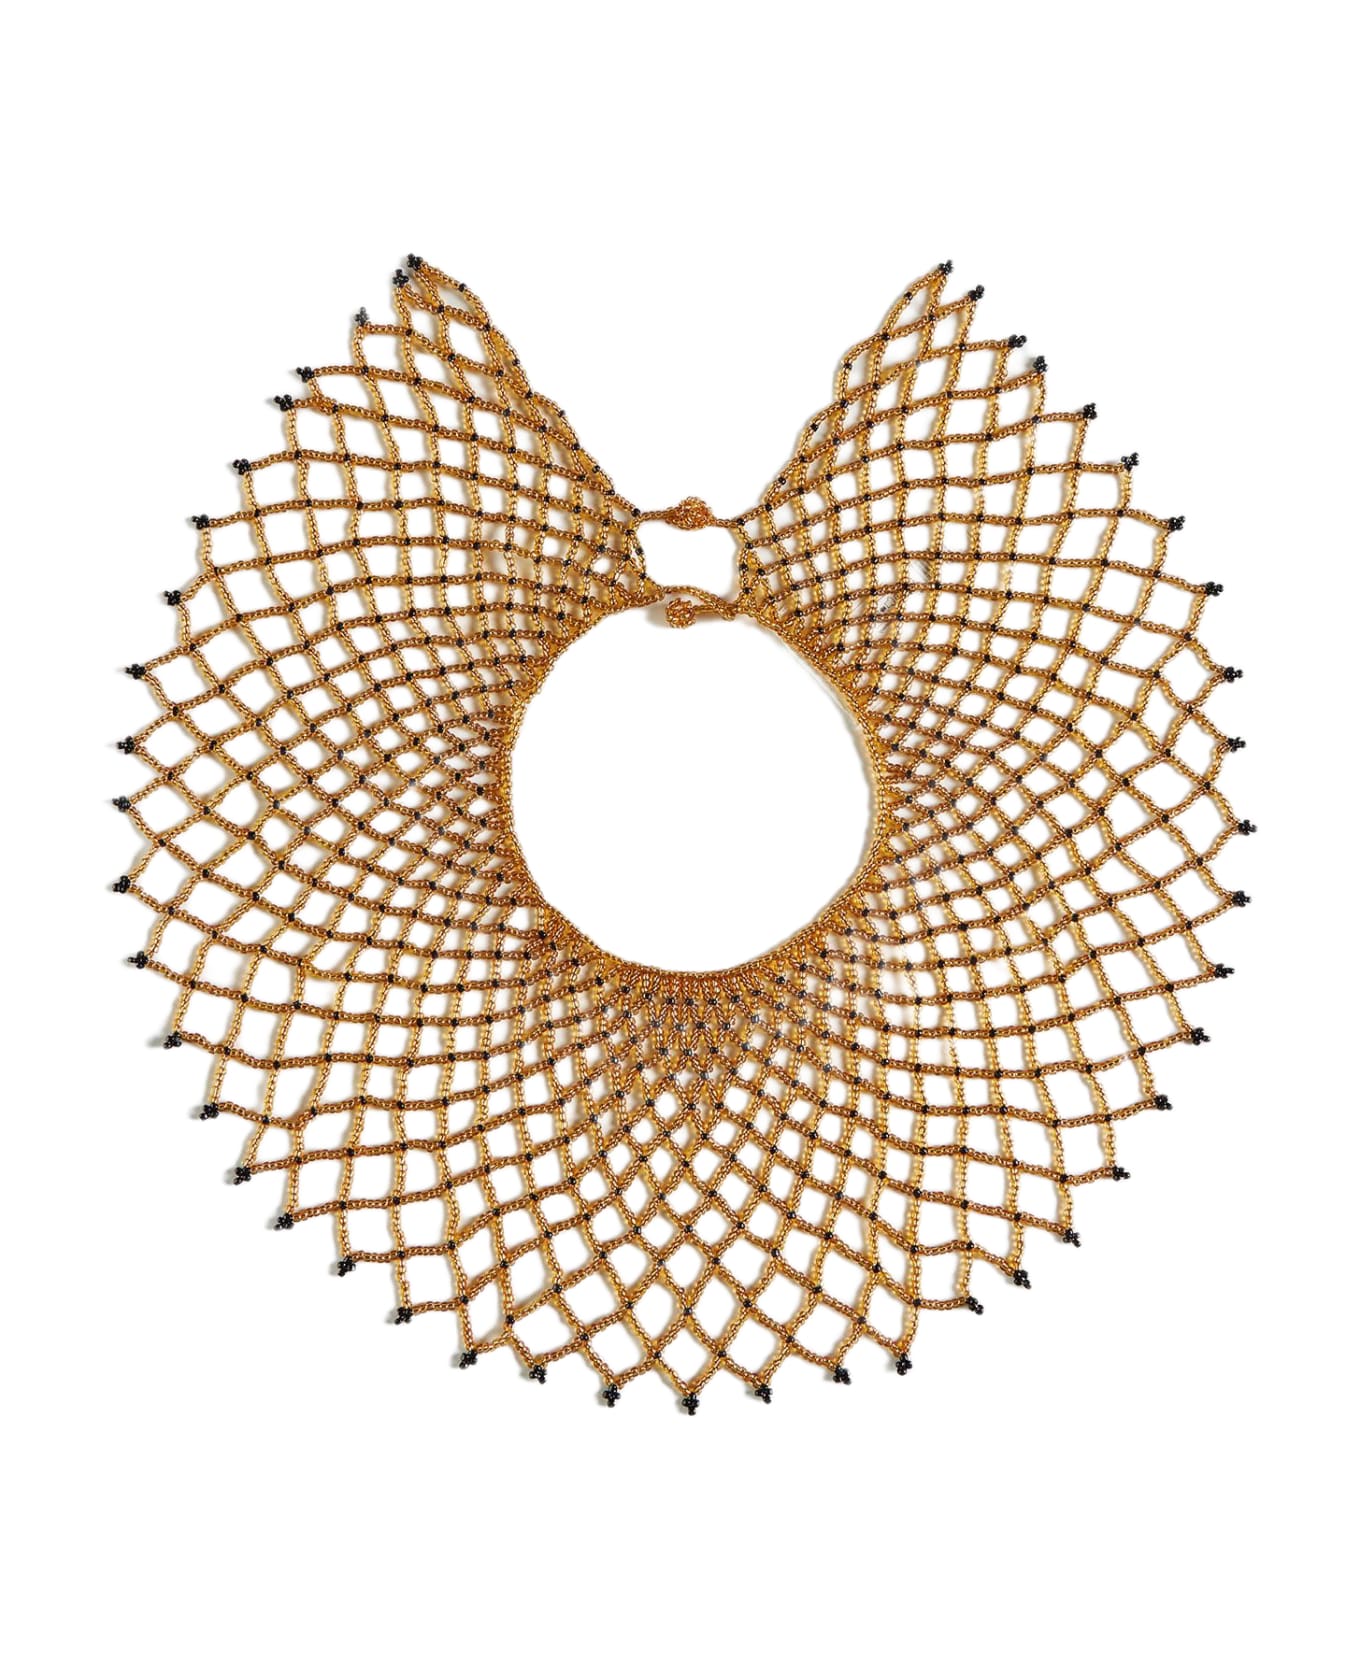 Forte_Forte Baguette Beads Necklace - Gold